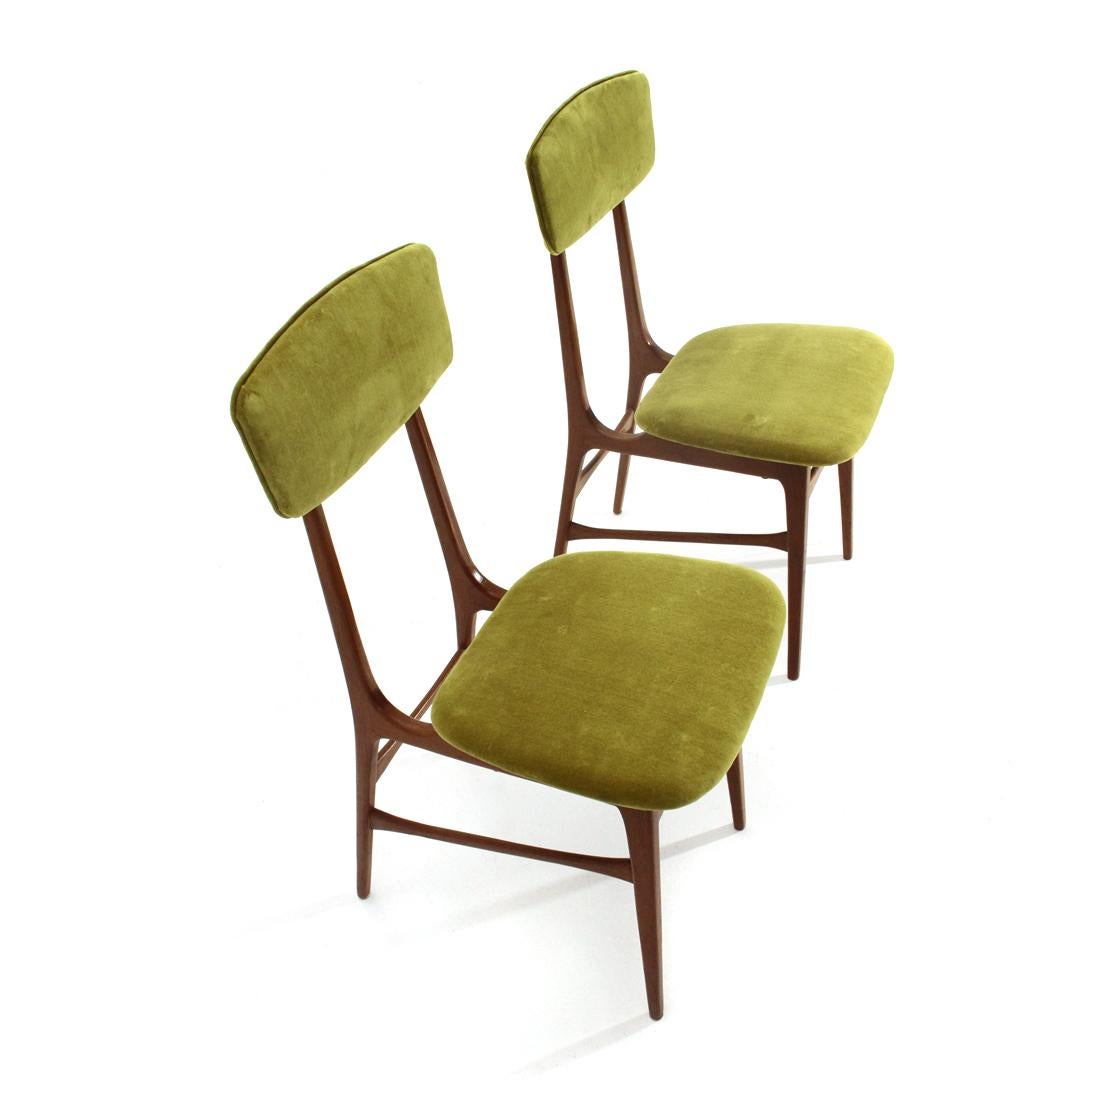 Pair of Italian-made chairs produced in the early 1960s.
Wooden structure.
Seat and back in curved plywood, padded and lined with new green velvet fabric.
Brass spacers.
Good general condition, some signs of normal use over time.

Dimensions: